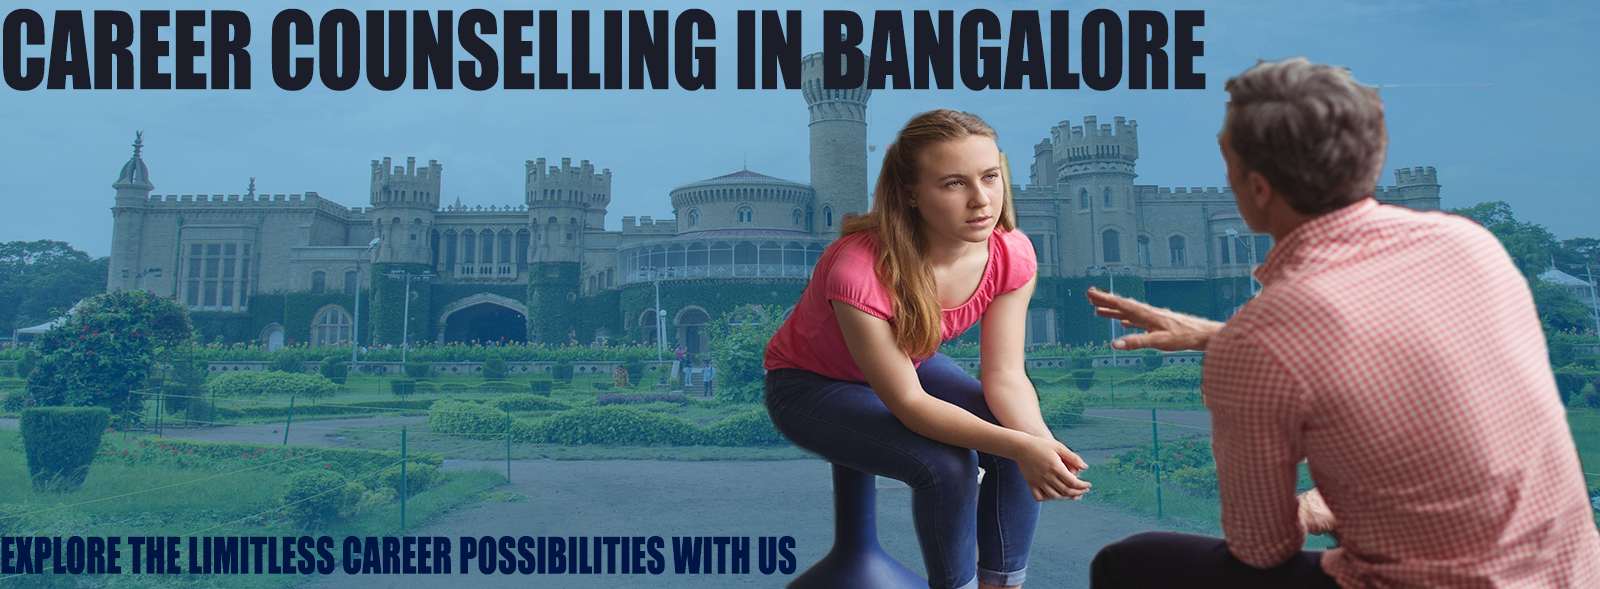 career counselling in bangalore